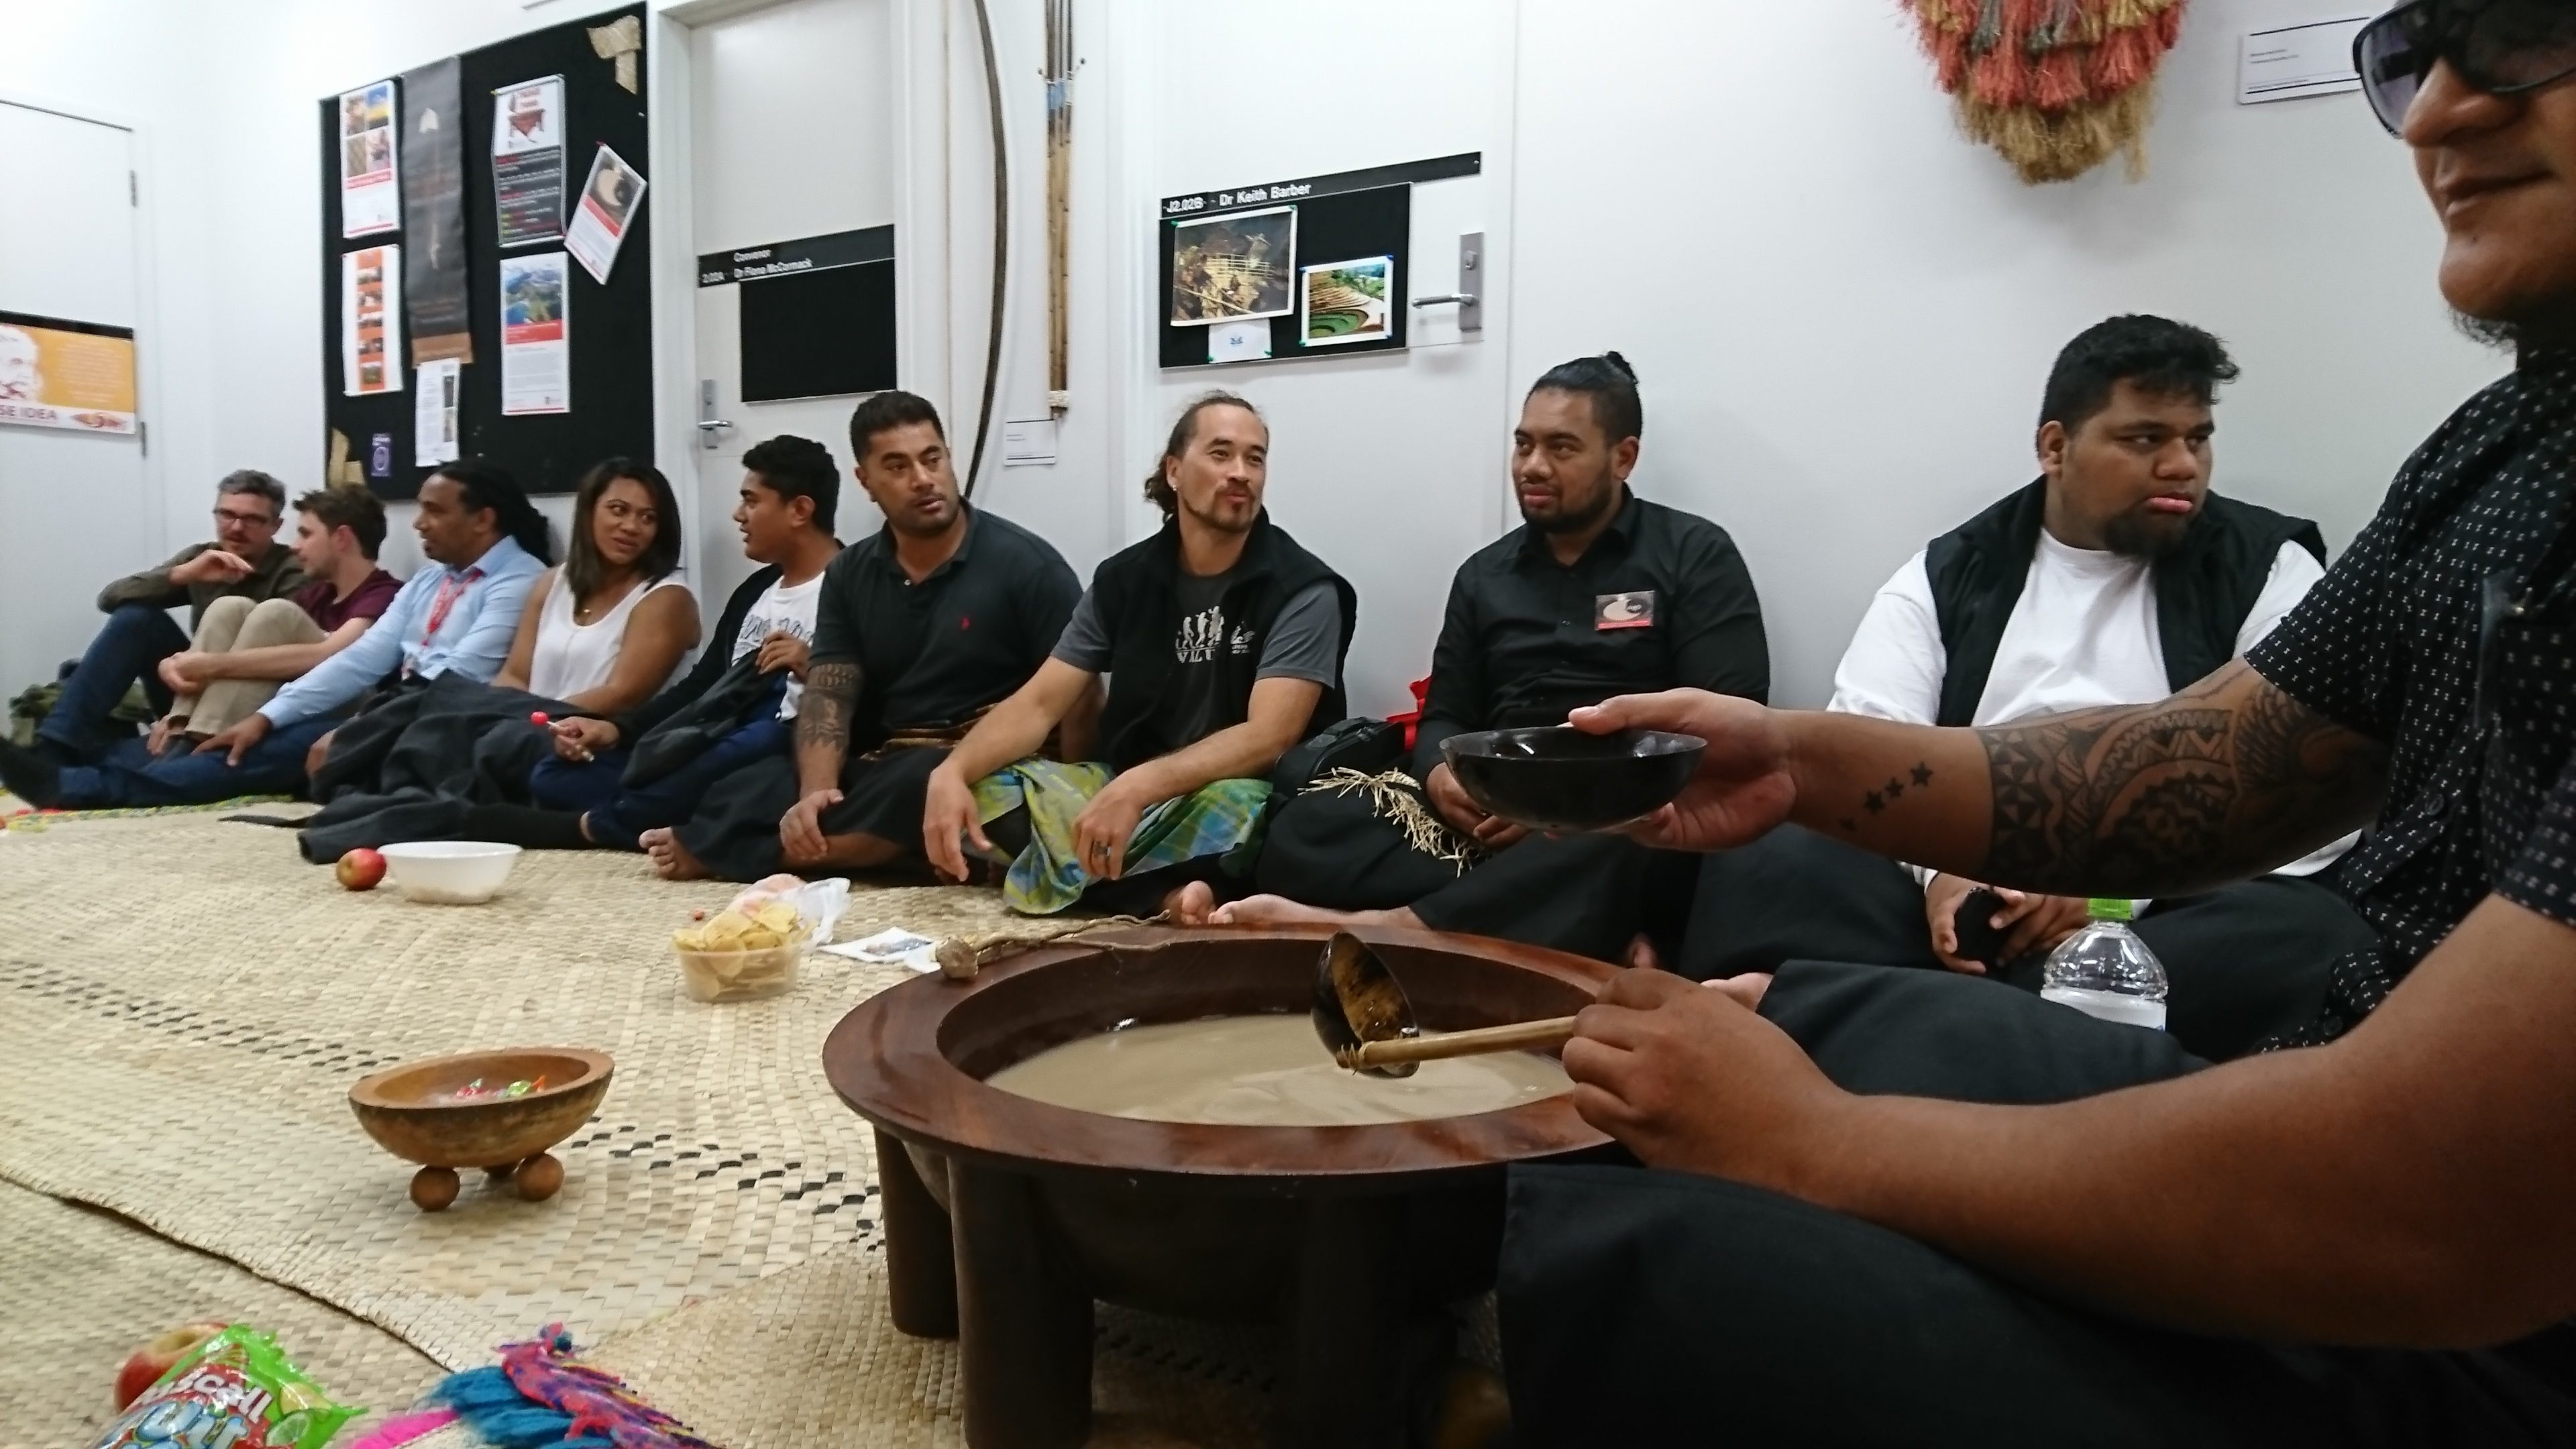 A workshop featuring traditional kava at the University of Waikato, New Zealand.